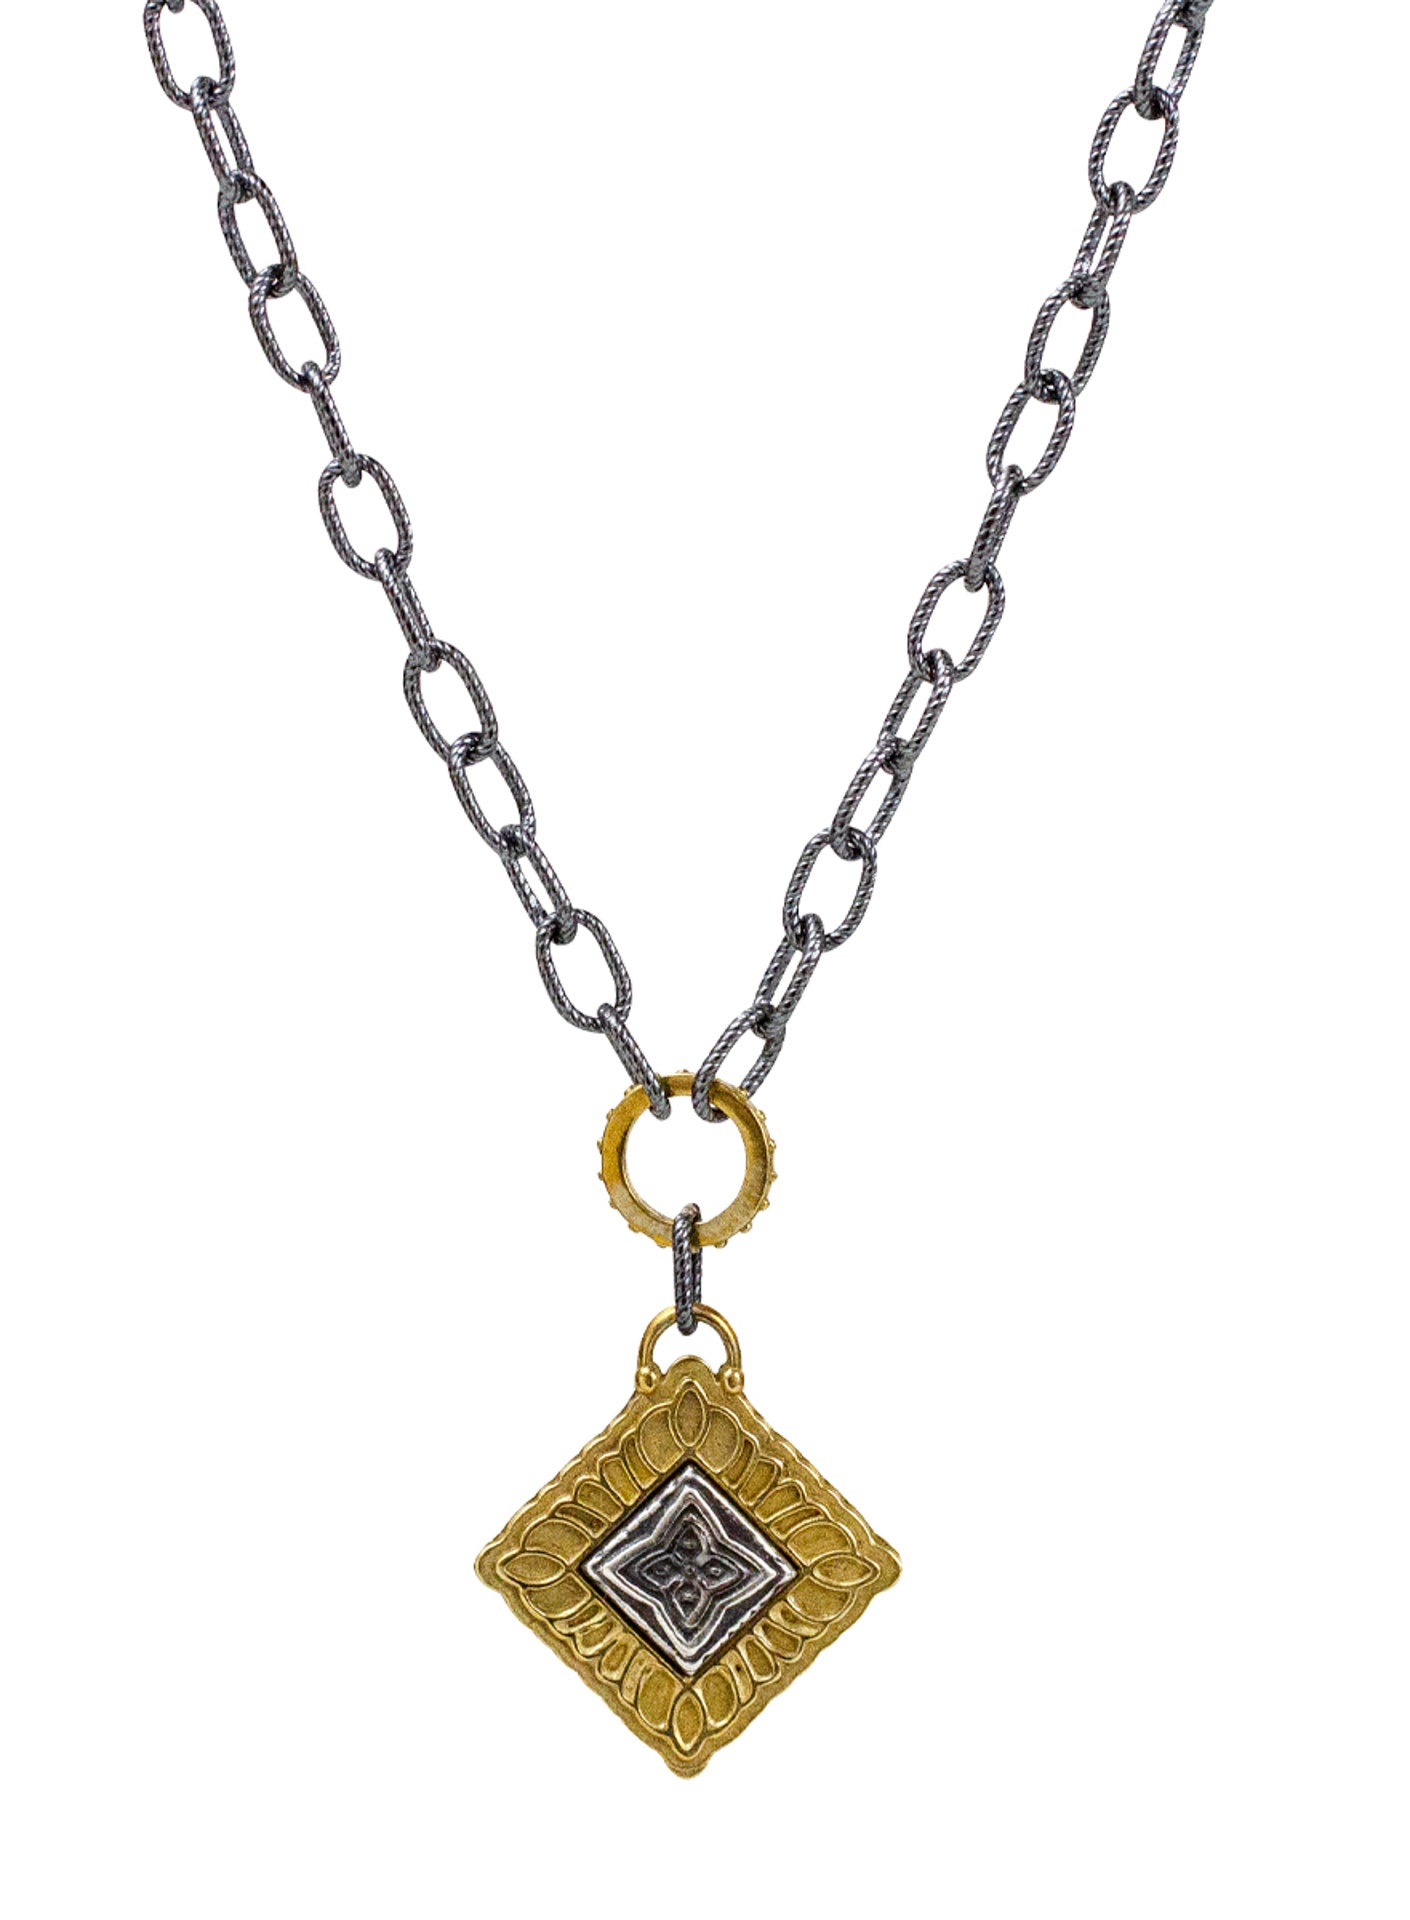 Channel Necklace - Sutra 